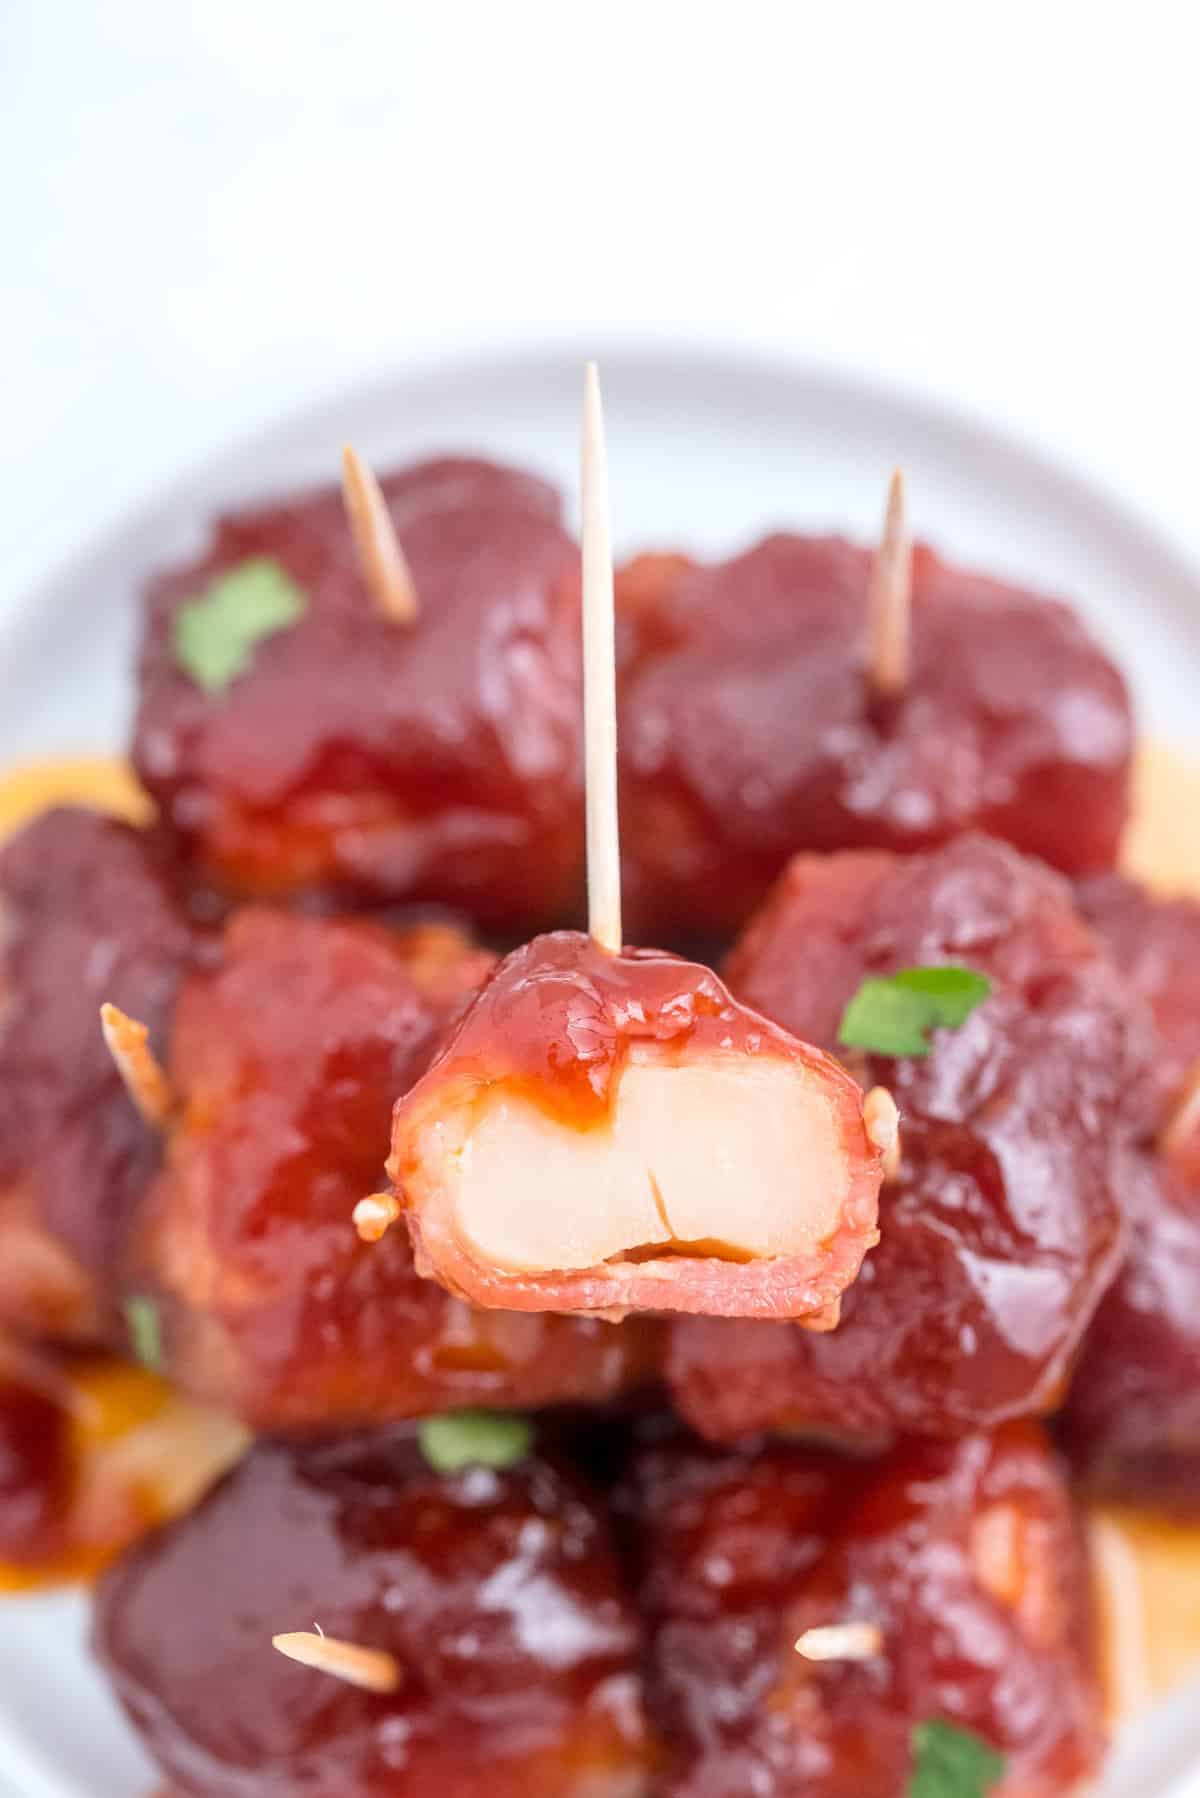 One bacon wrapped water chestnut cut in half, on top of a pile of whole ones with toothpicks.